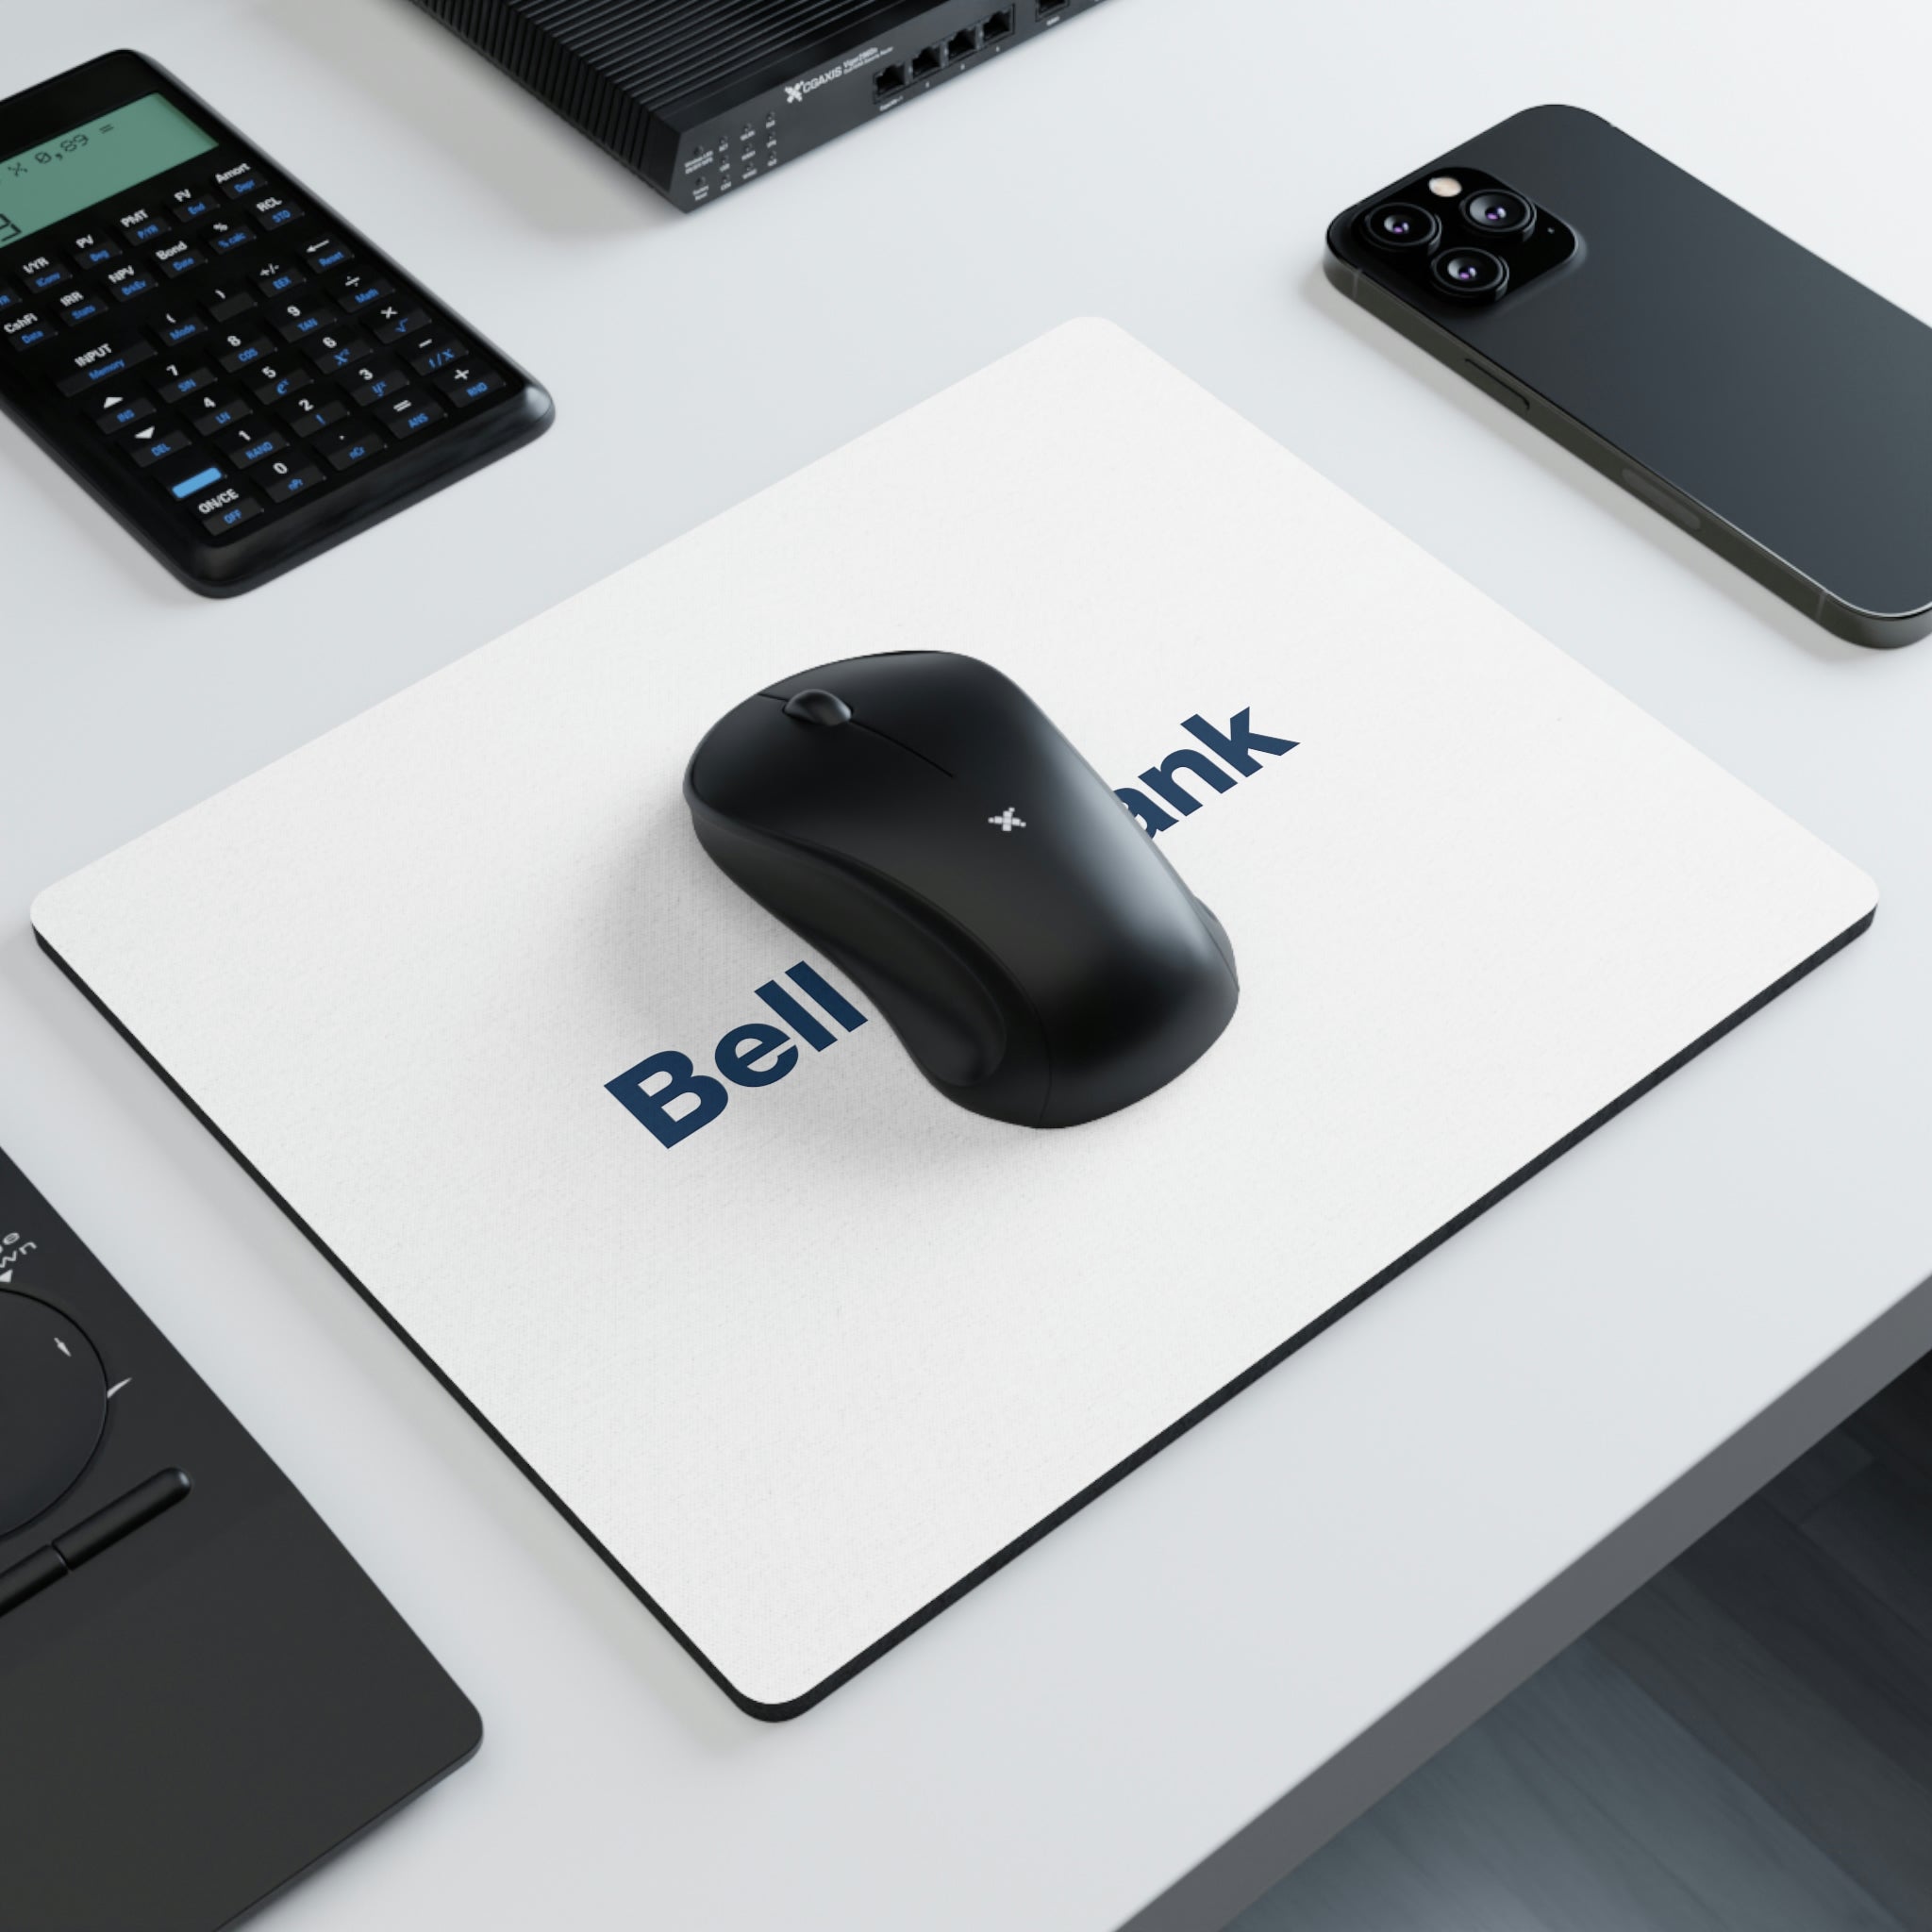 Bell Bank Rectangular Mouse Pad - DSP On Demand